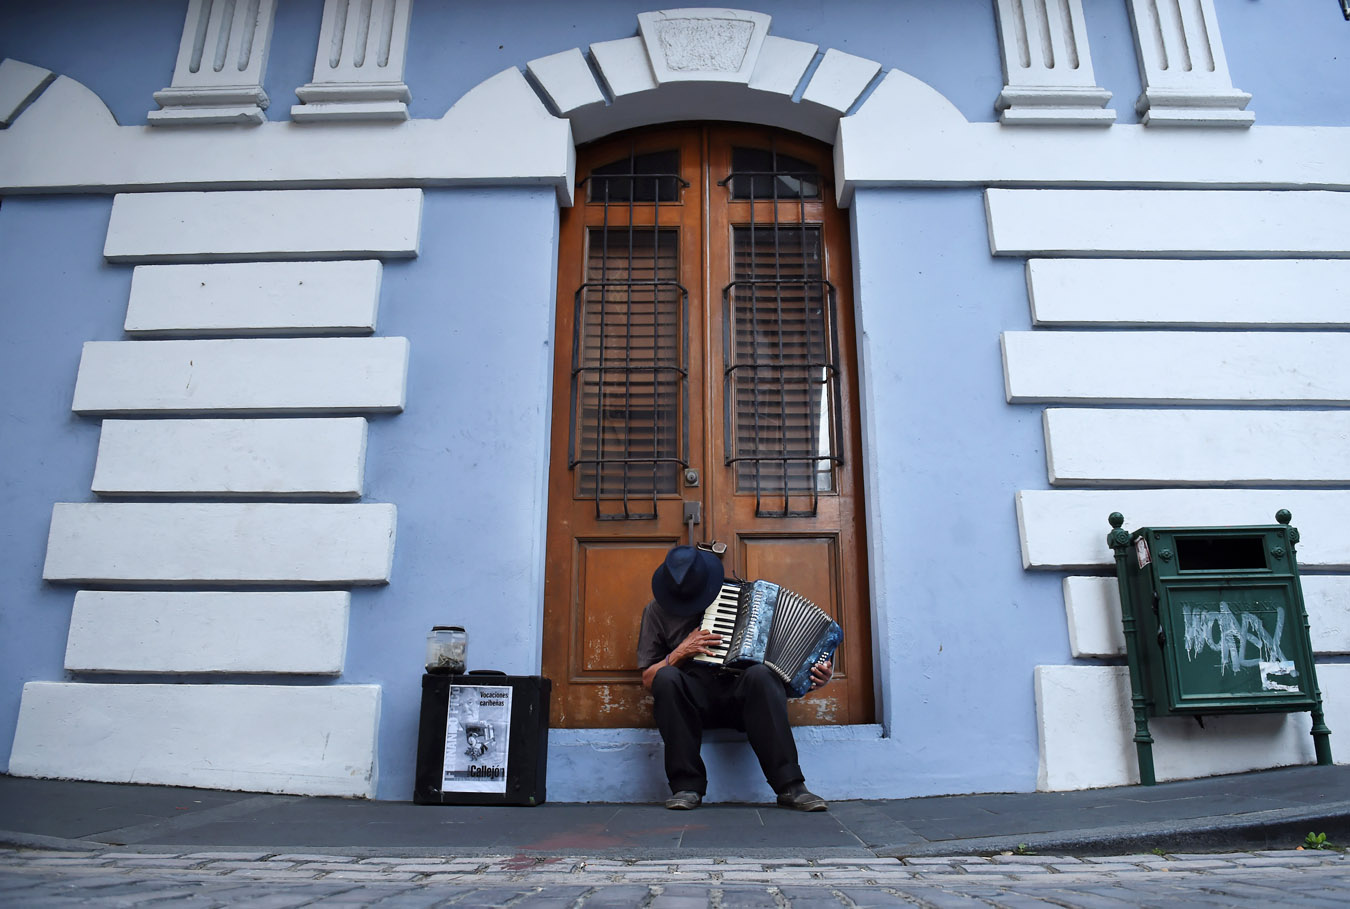 A man plays an accordion for tips on Friday July 03, 2015 in Old San Juan, Puerto Rico. The historic area brings in countless tourists. (Photo by Matt McClain/ The Washington Post)